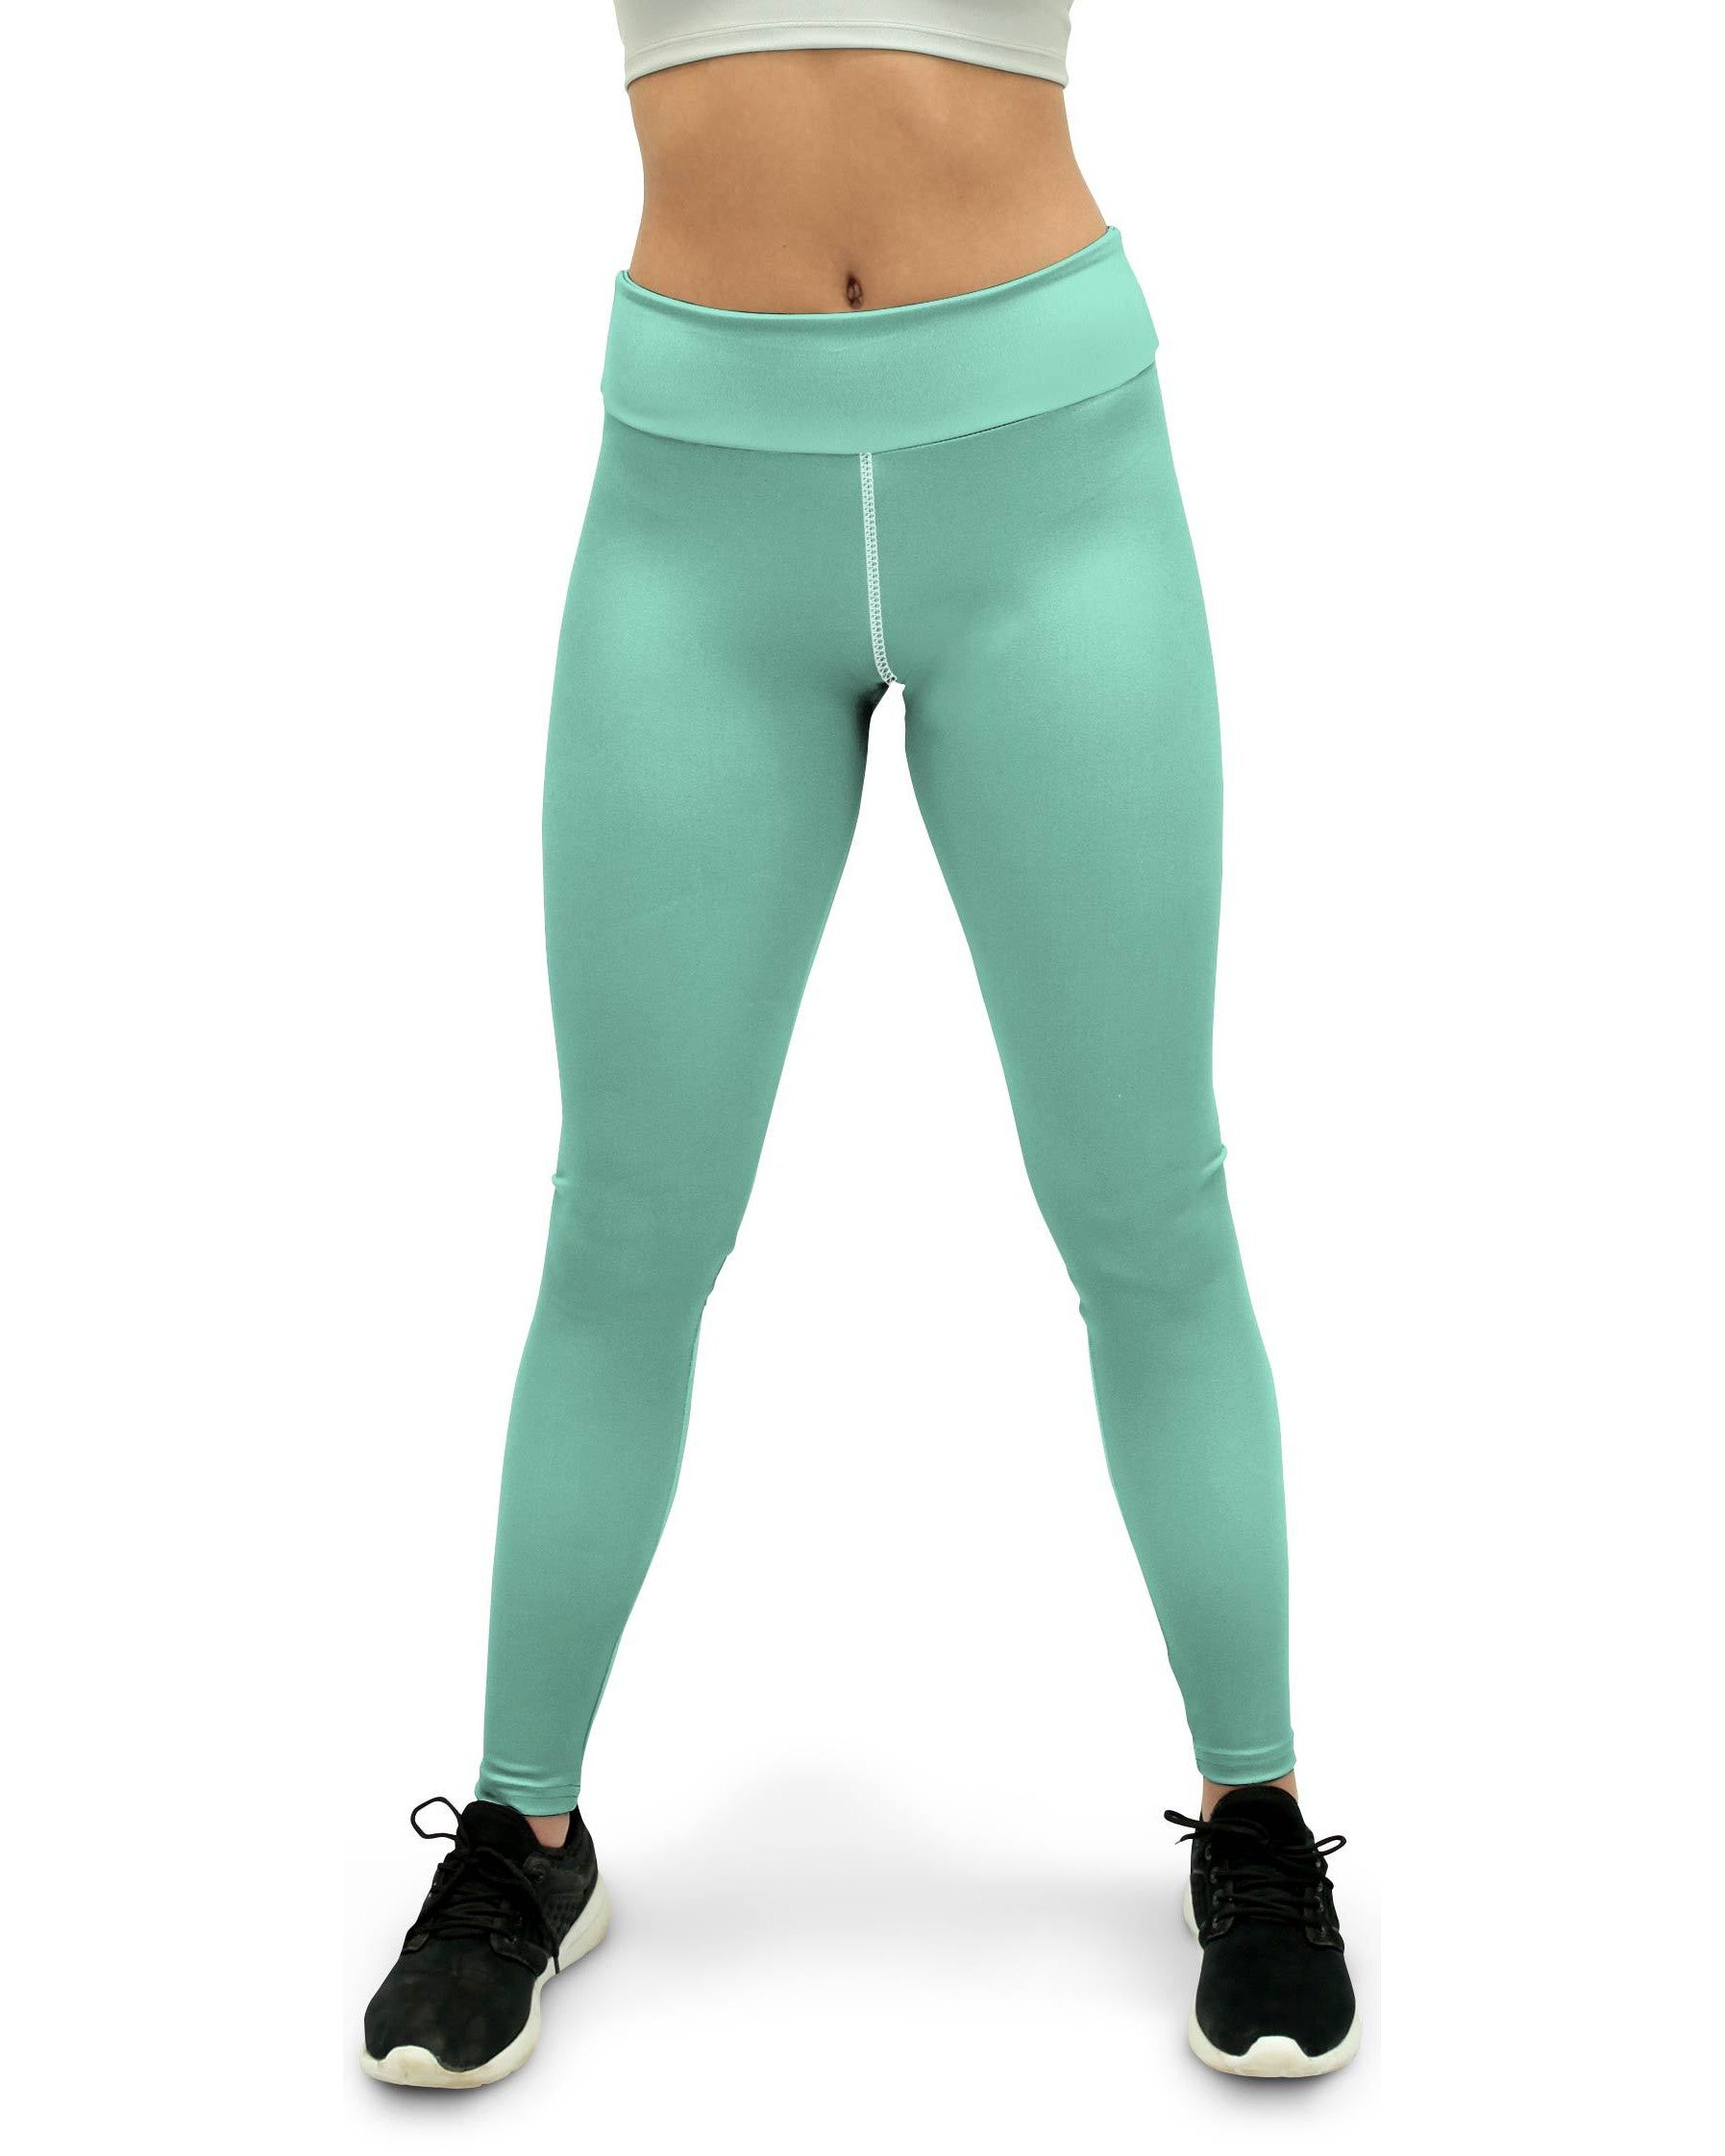 6 Day Green Workout Pants for Weight Loss